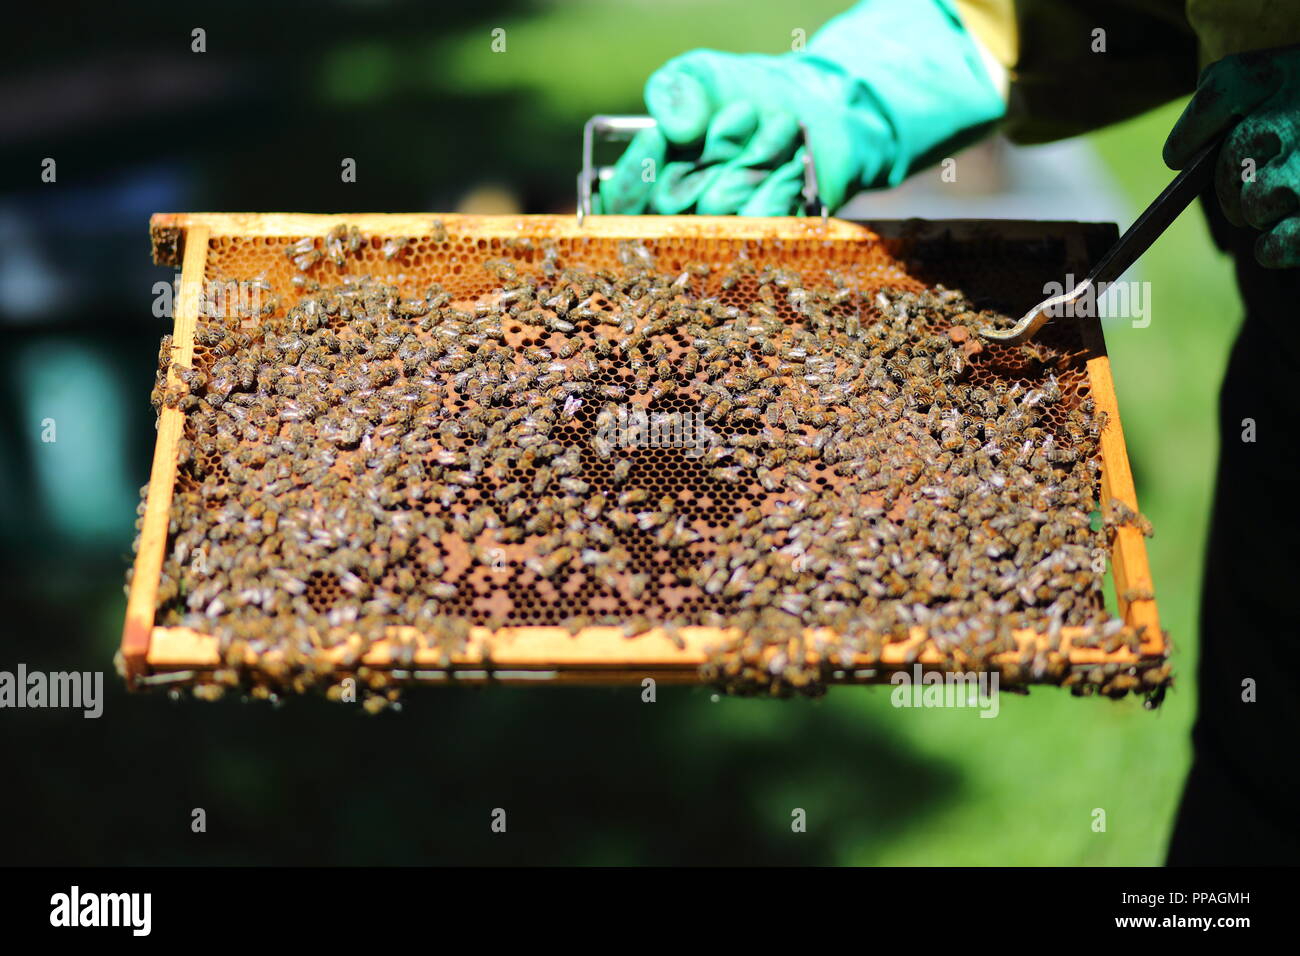 Hive frame covered in honeybees, held by the beekeeper, who's wearing safety gloves. Photo taken in Brescia, Italy. Stock Photo